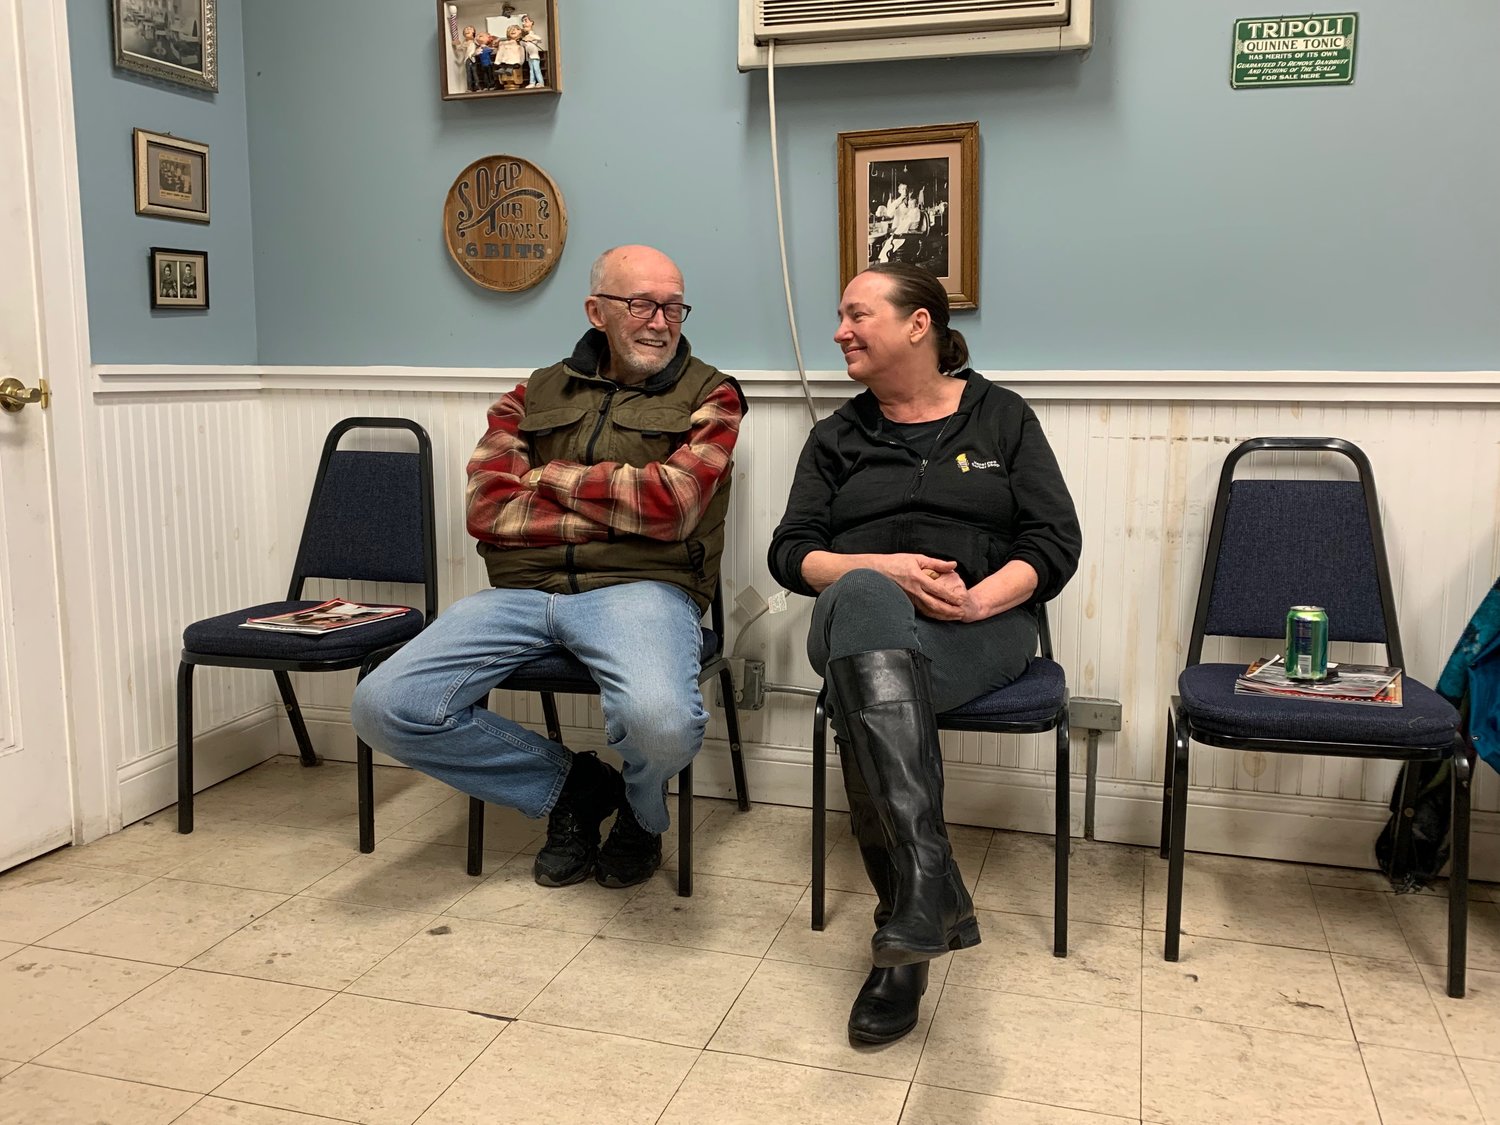 Barber Kristin Ohnstad (right) became the proprietor of Bob’s Barber Shop when her father, Bob, retired 11 years ago. She is selling to move out west. (Photo by Sue Filbin)